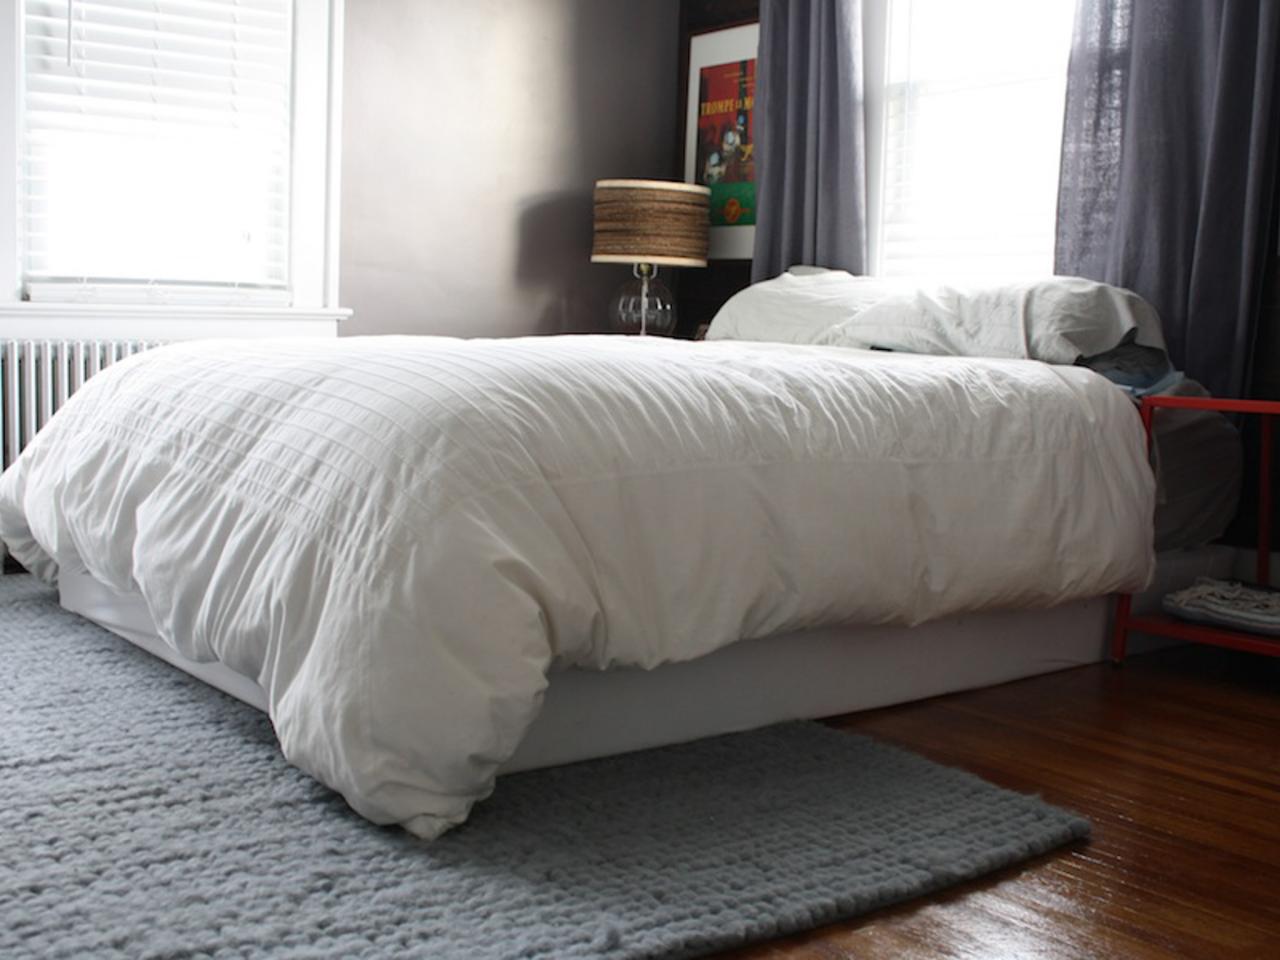 Boxspring With An Easy Fabric Wrap, Diy No Box Spring Bed Frame